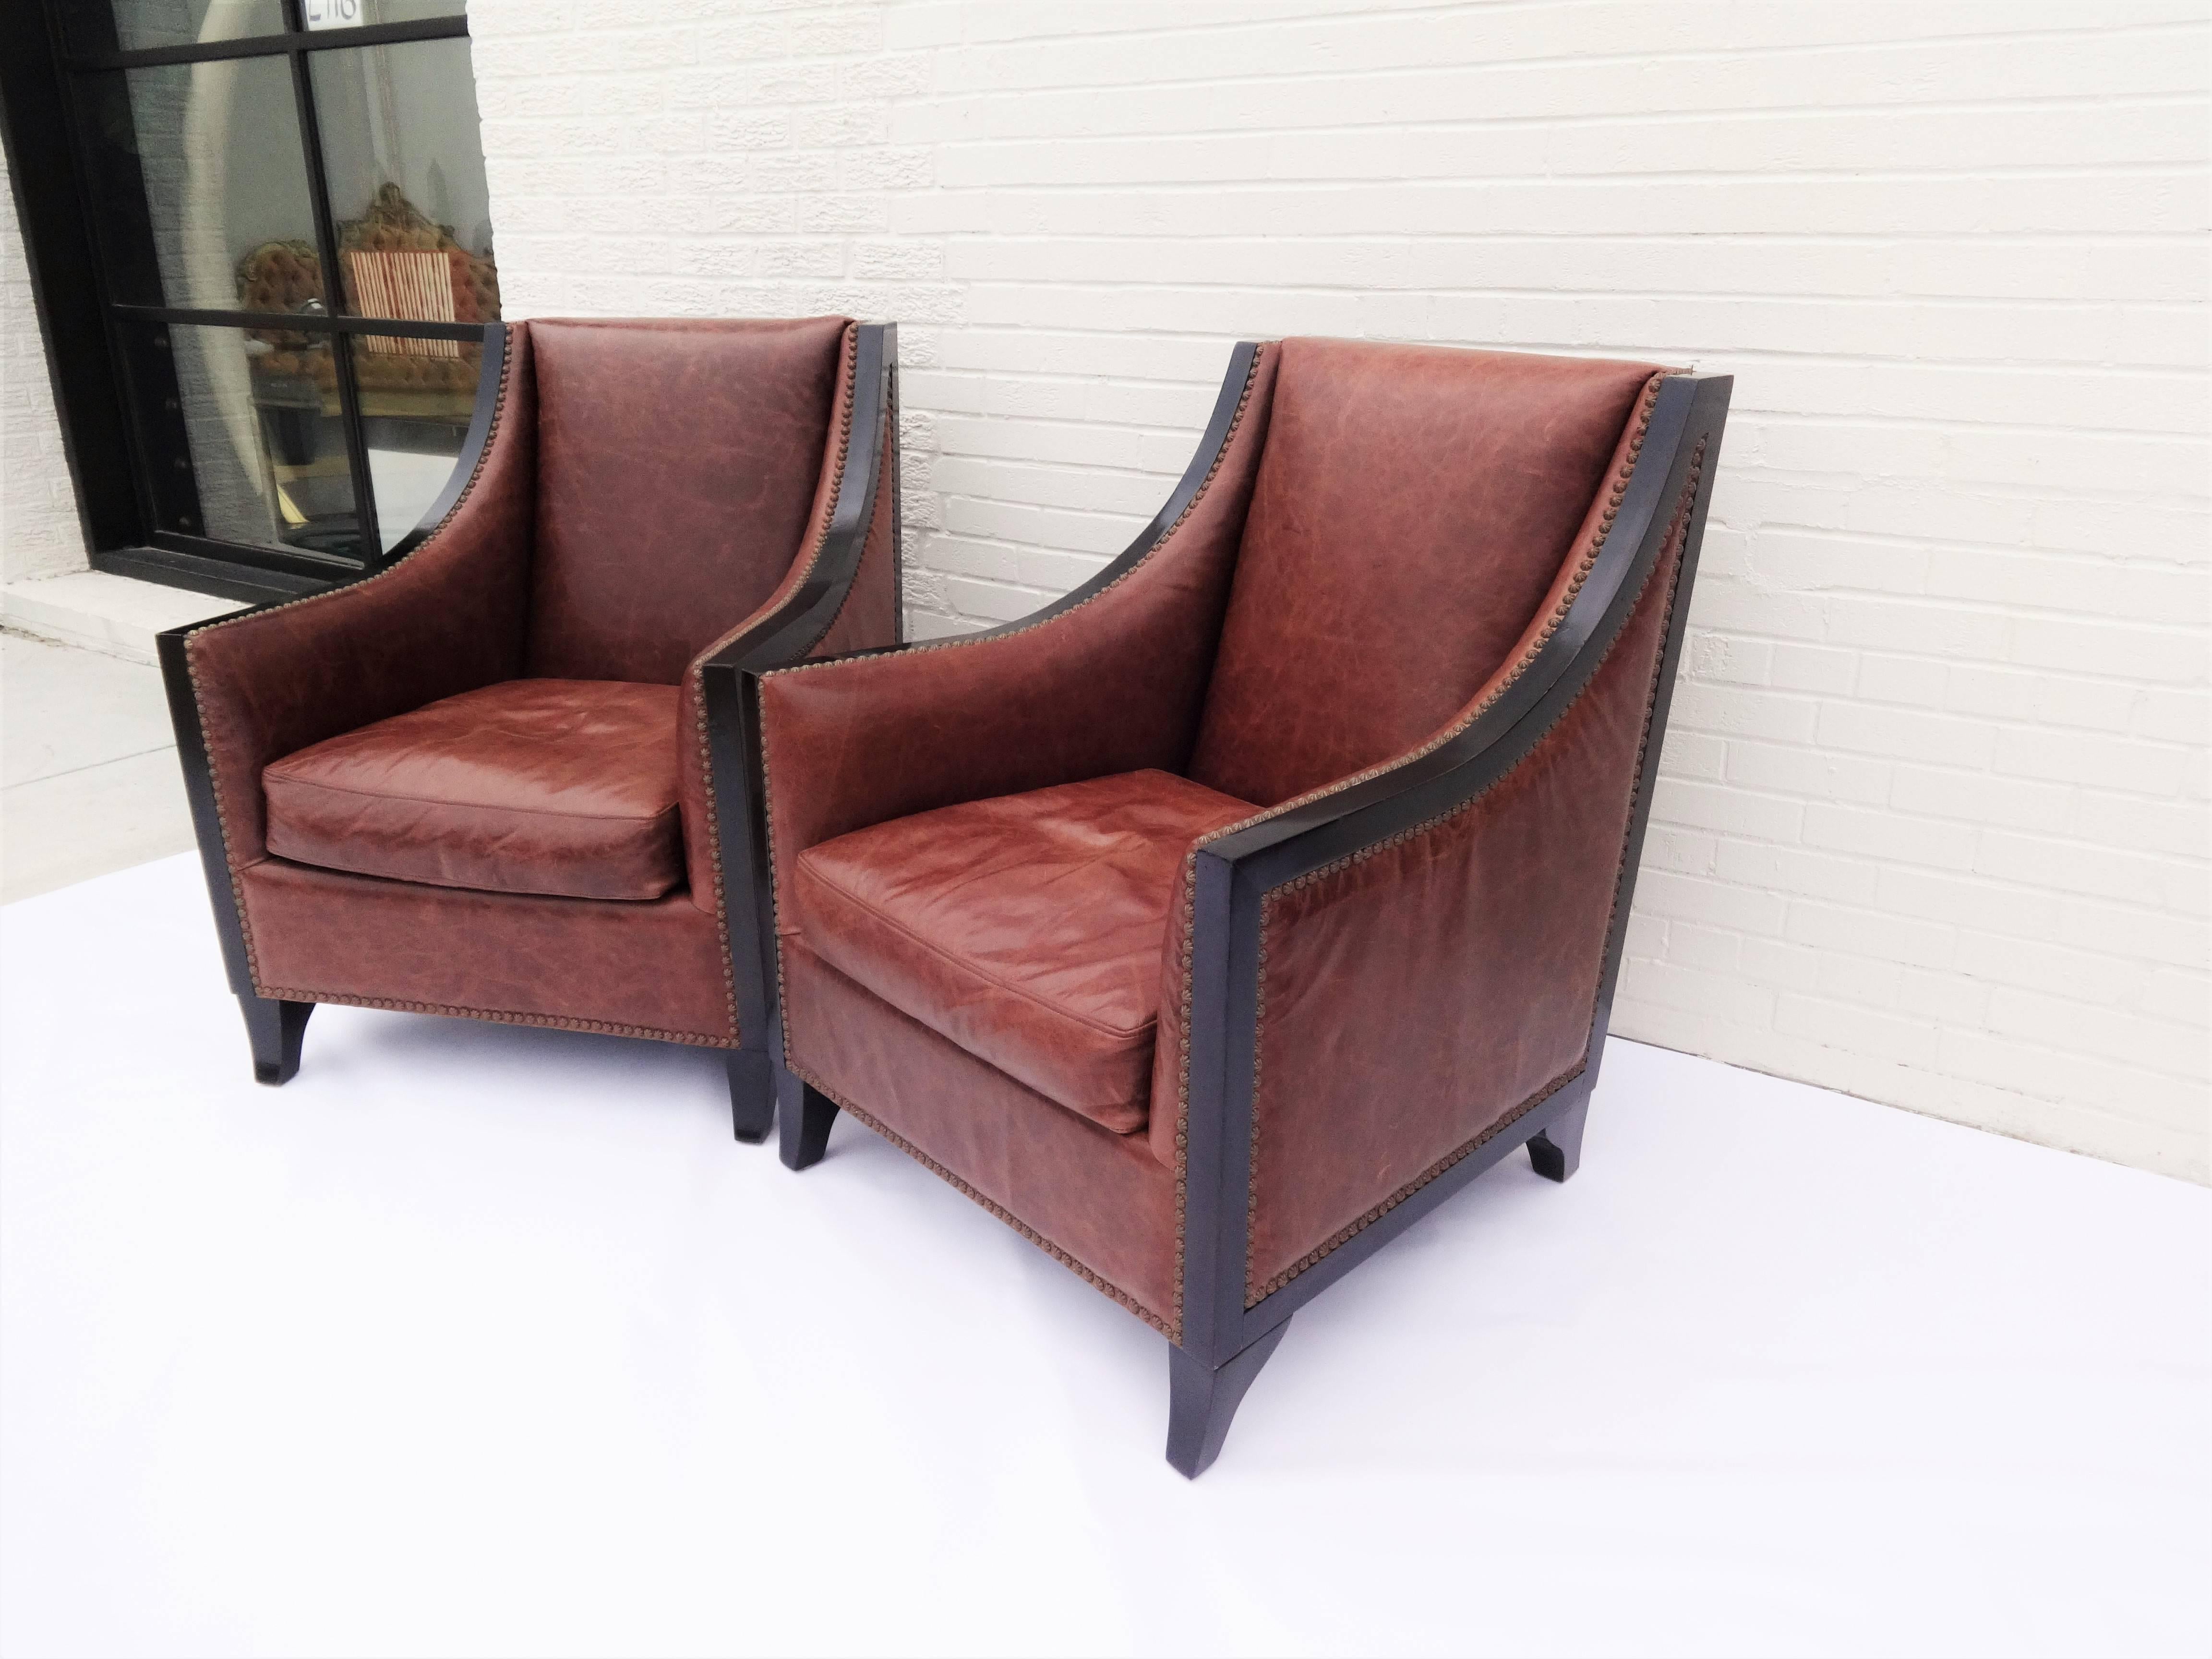 Pair of High Back Leather Club Chairs In Good Condition For Sale In Dallas, TX